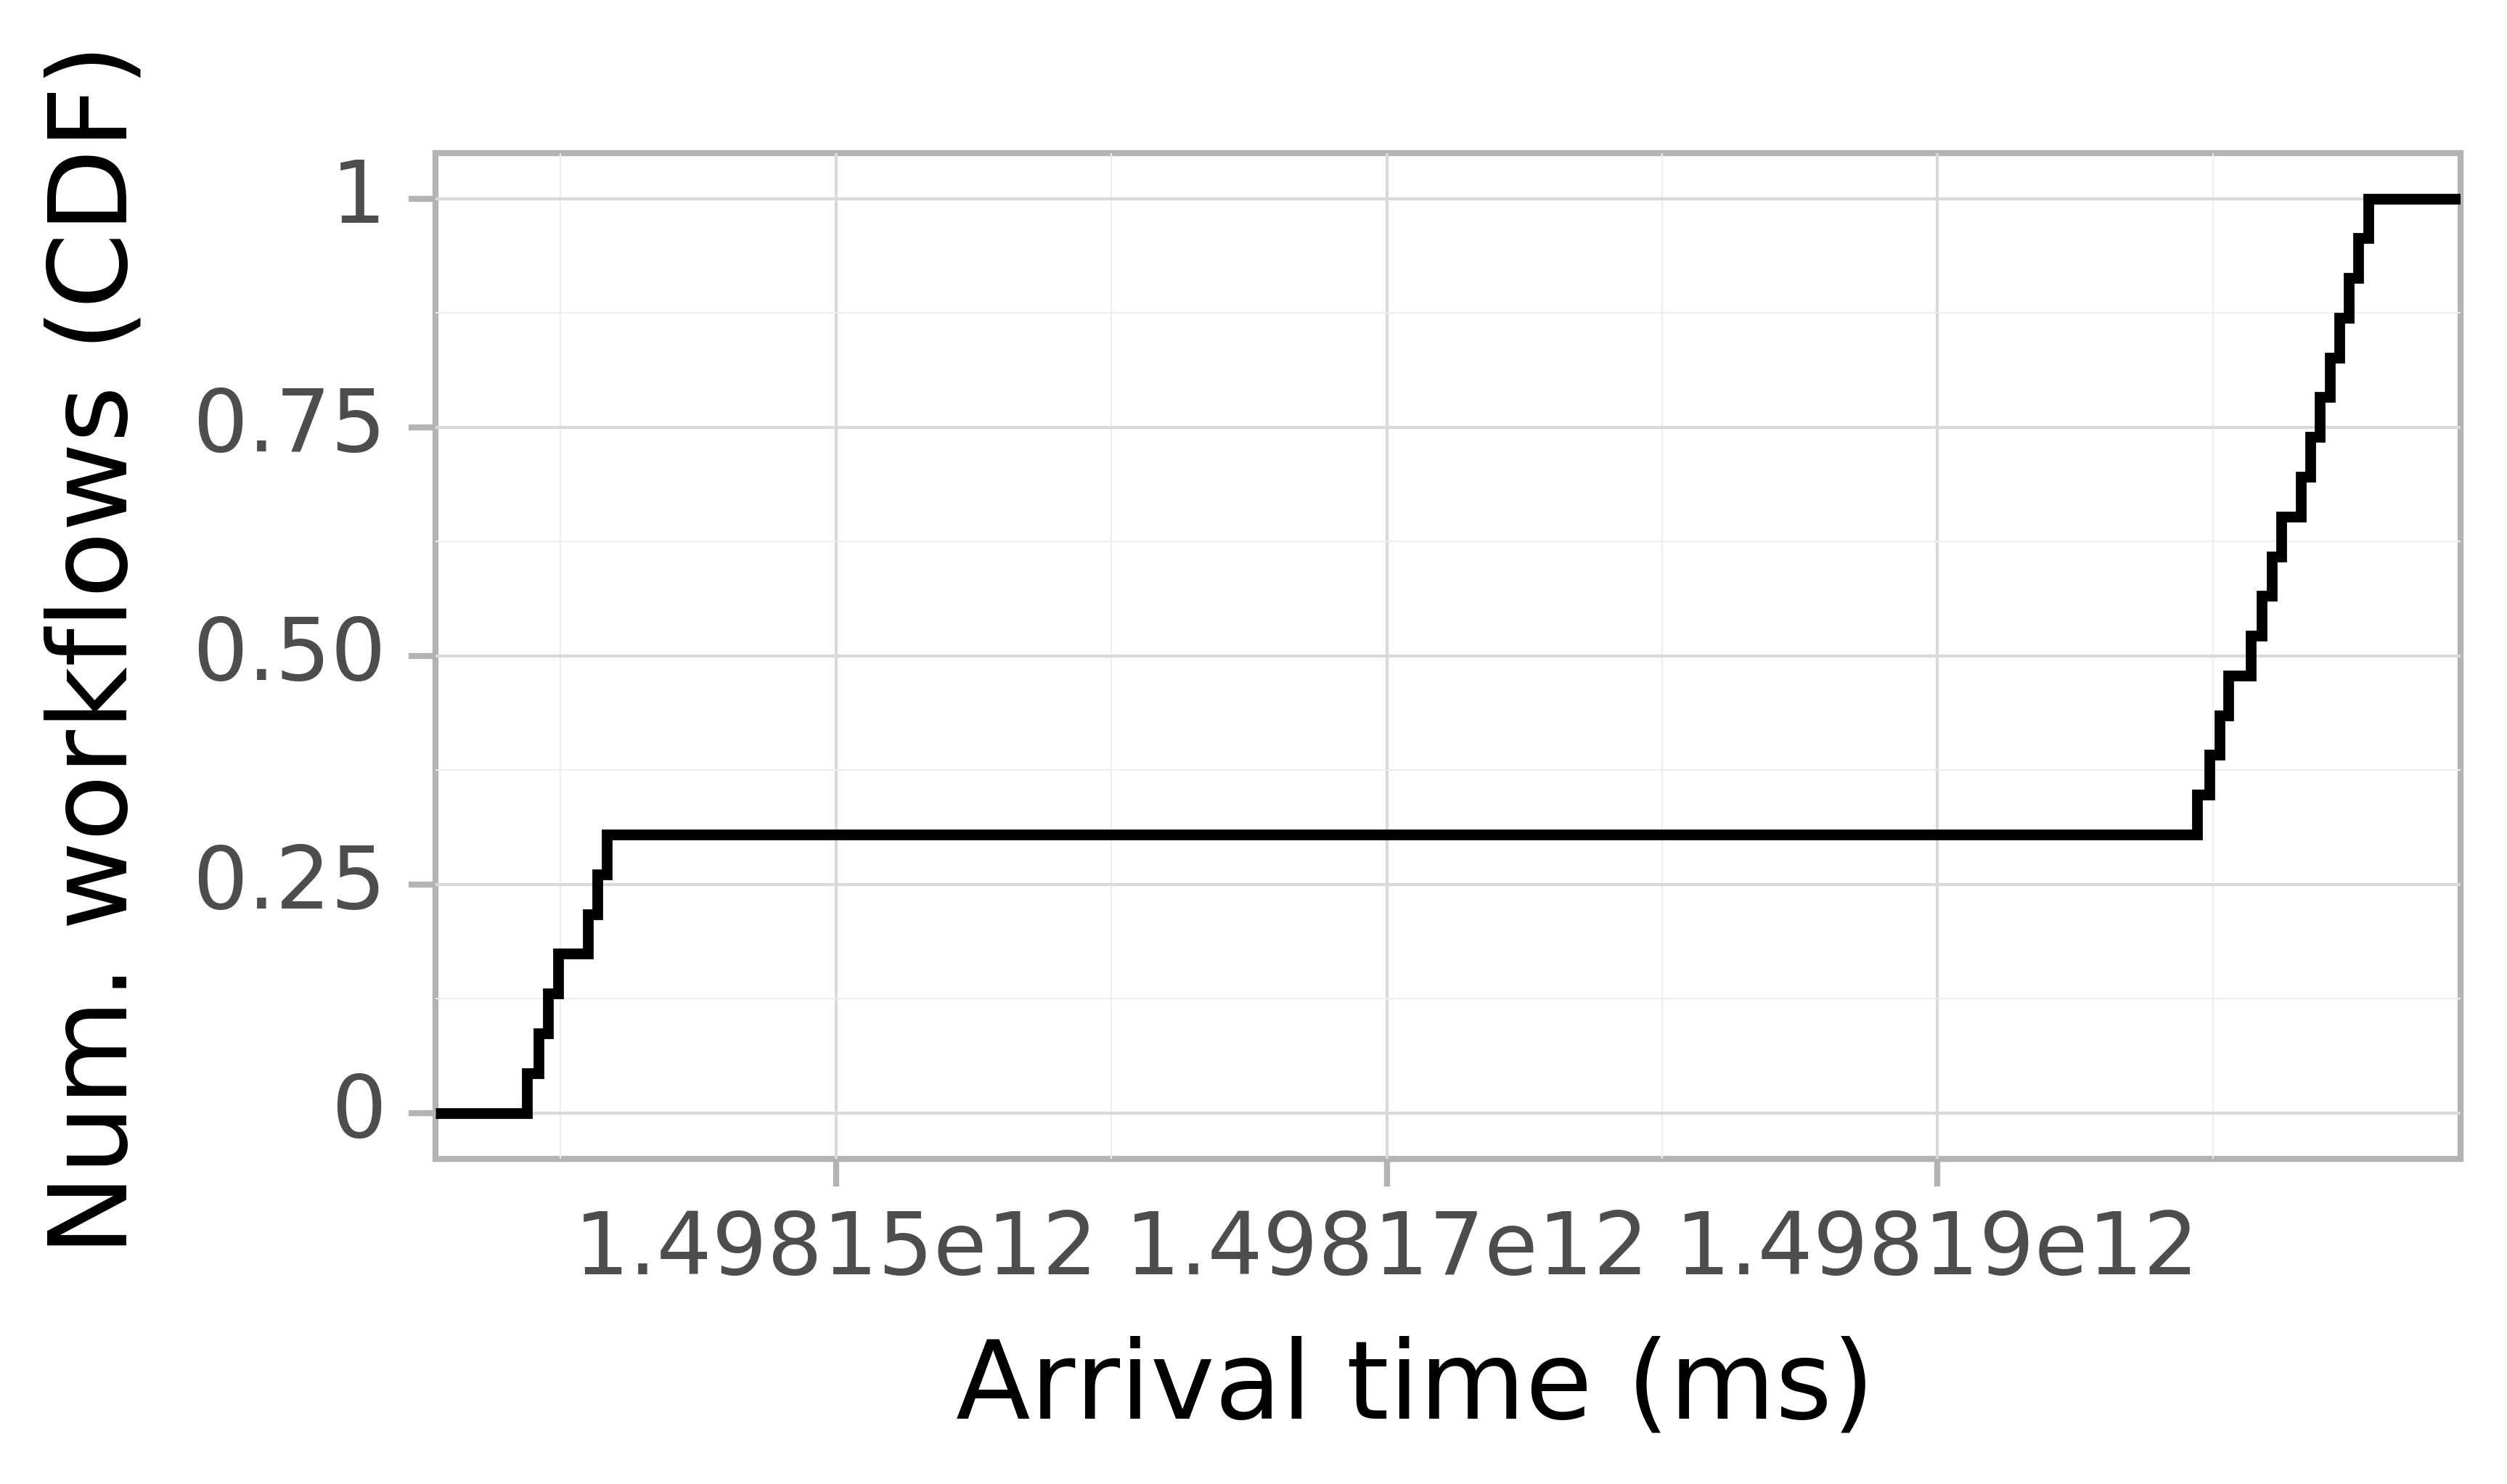 Job arrival CDF graph for the askalon-new_ee28 trace.